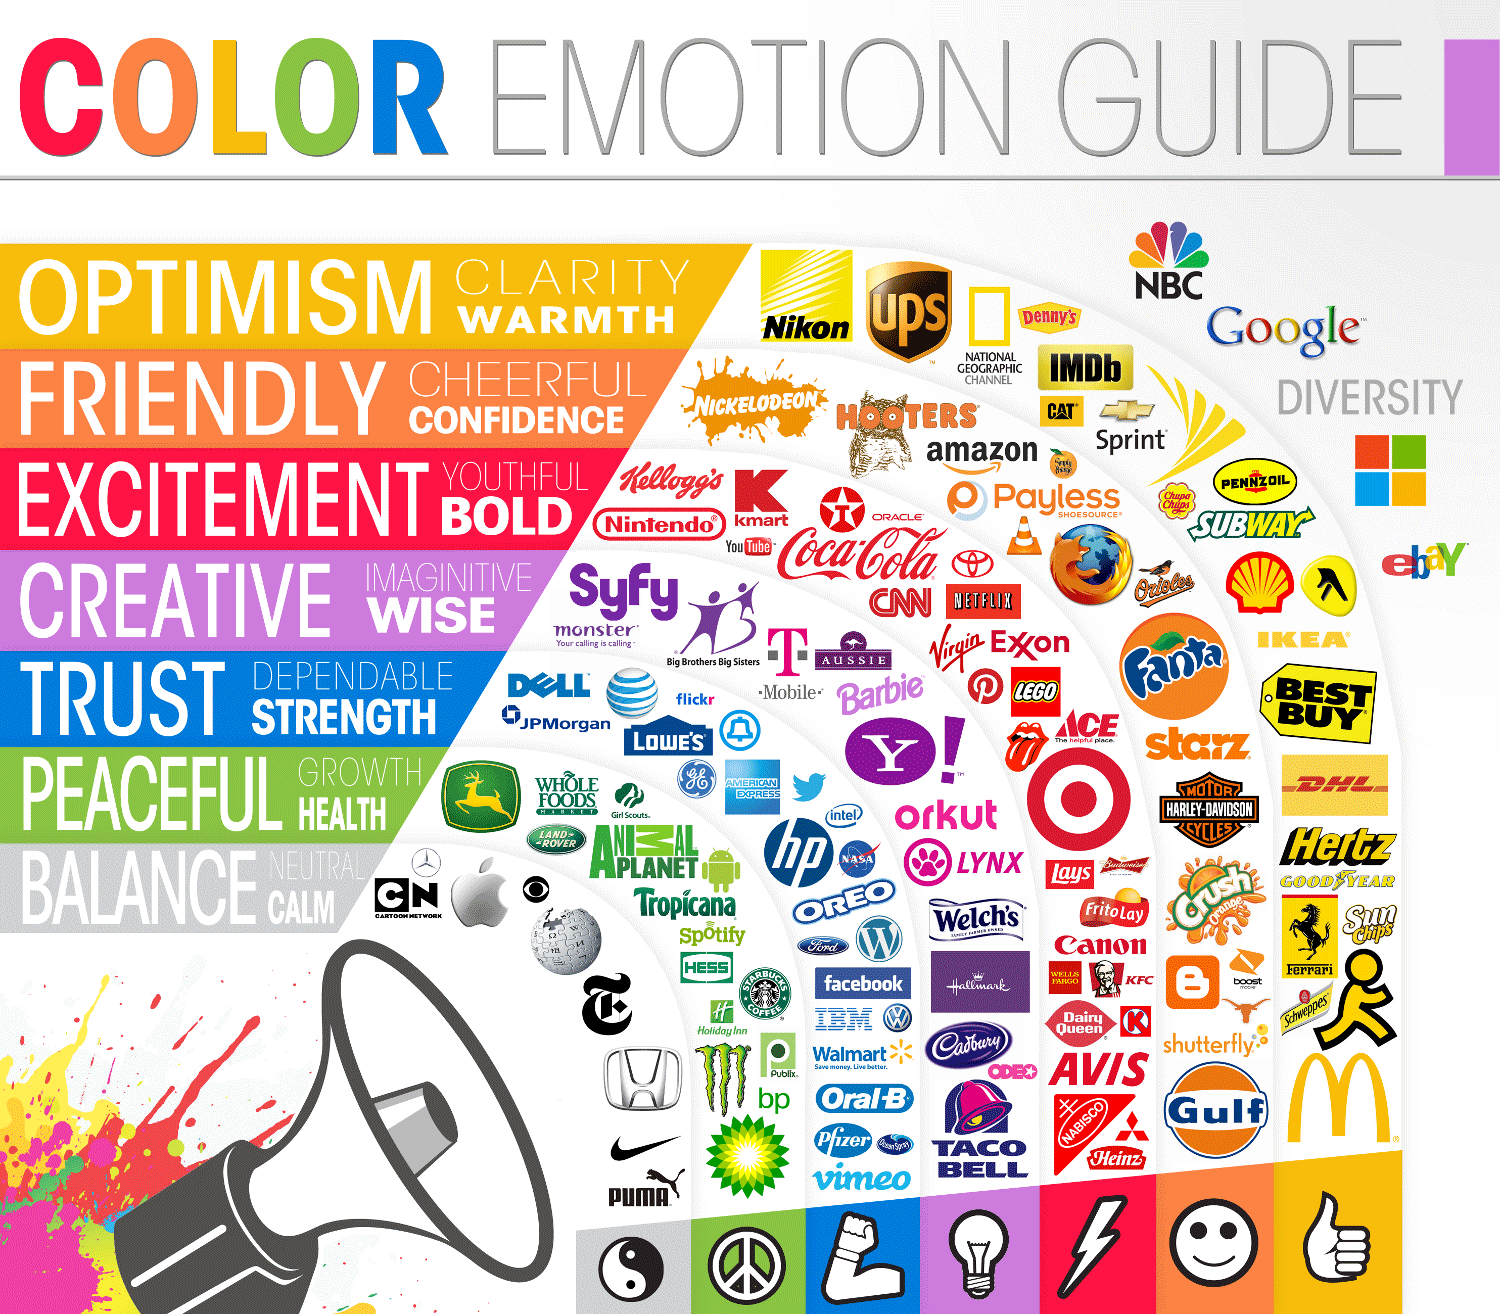 guide-to-color-emotions